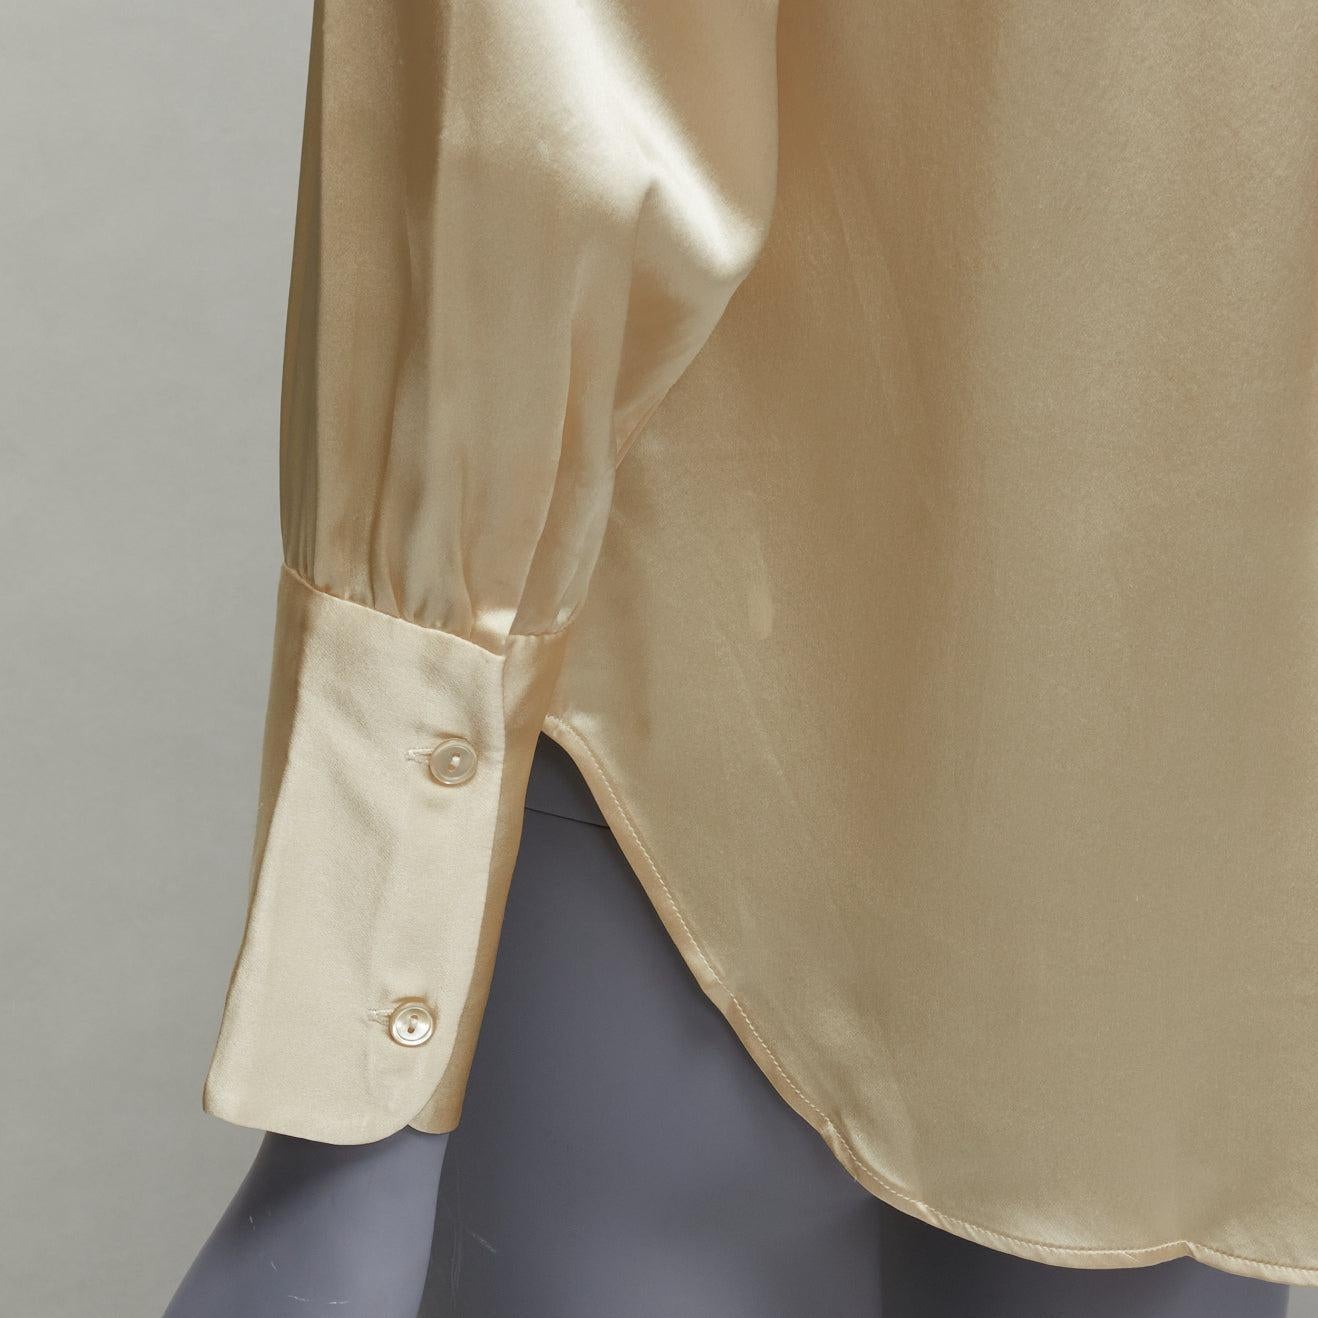 NILI LOTAN 100% silk champagne pleated shoulder seam V neck popover blouse XS
Reference: SNKO/A00335
Brand: Nili Lotan
Material: Silk
Color: Cream
Pattern: Solid
Closure: Slip On
Extra Details: Gathers at yoke.
Made in: United